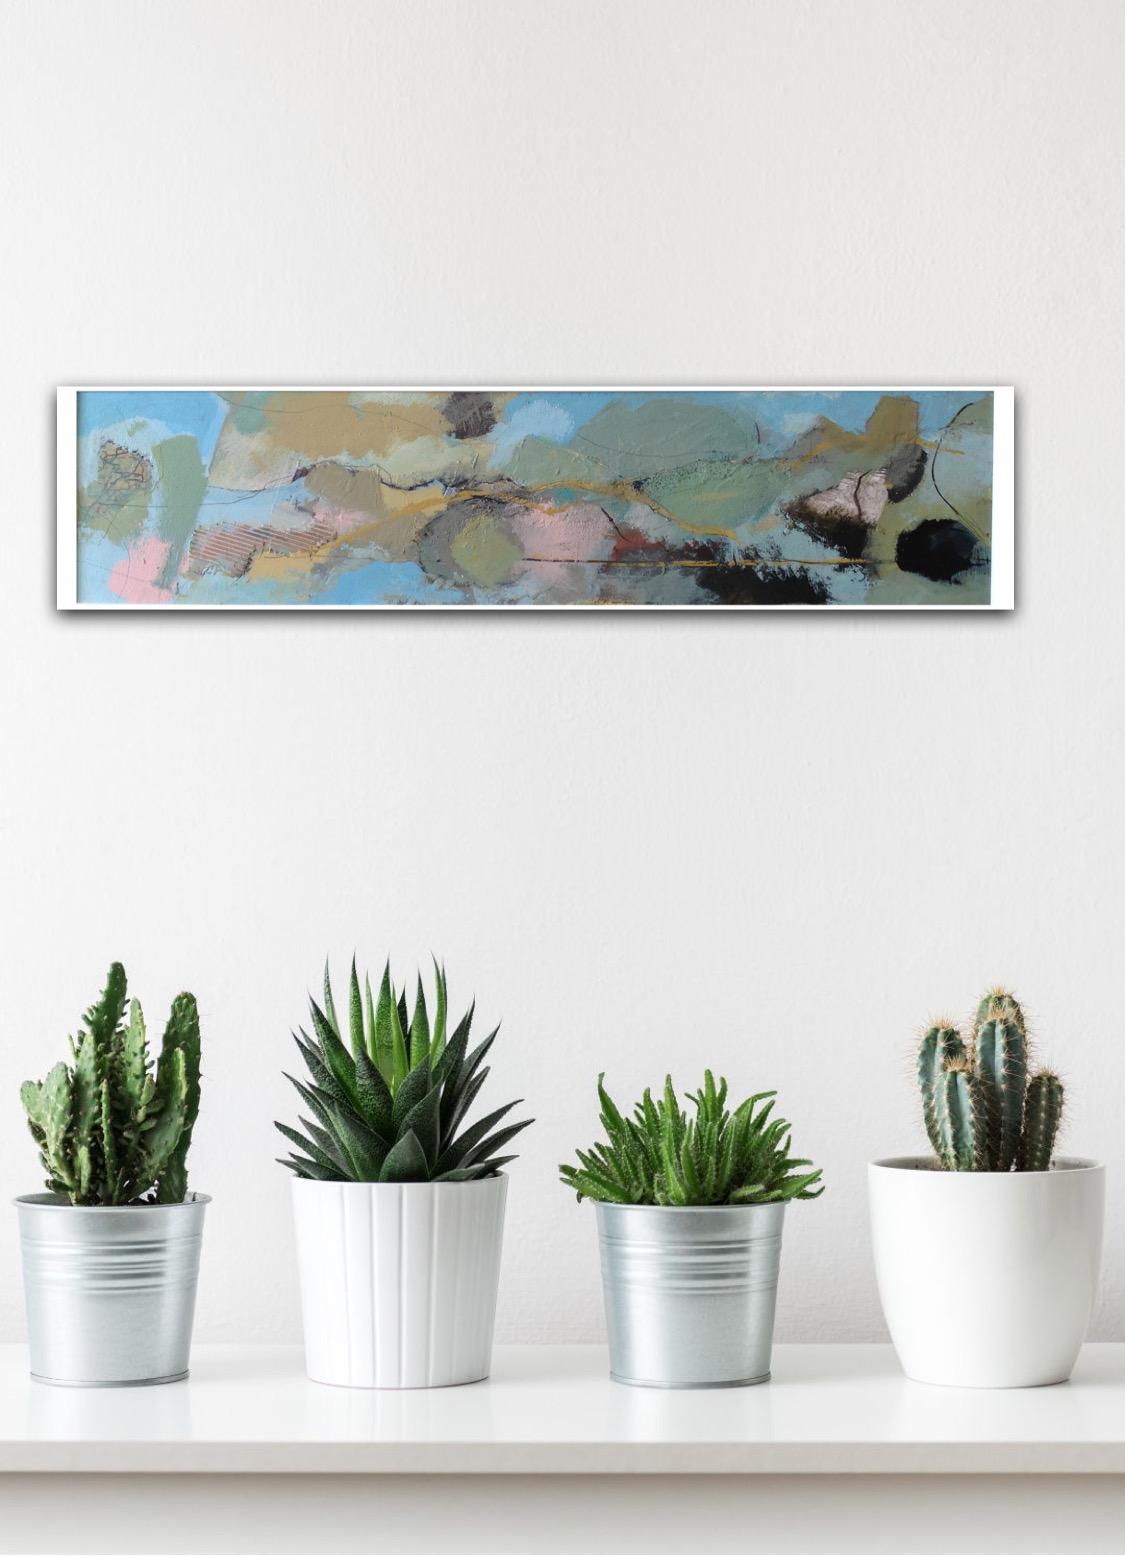 Soft Landscape - Gray Abstract Painting by Maggie LaPorte Banks